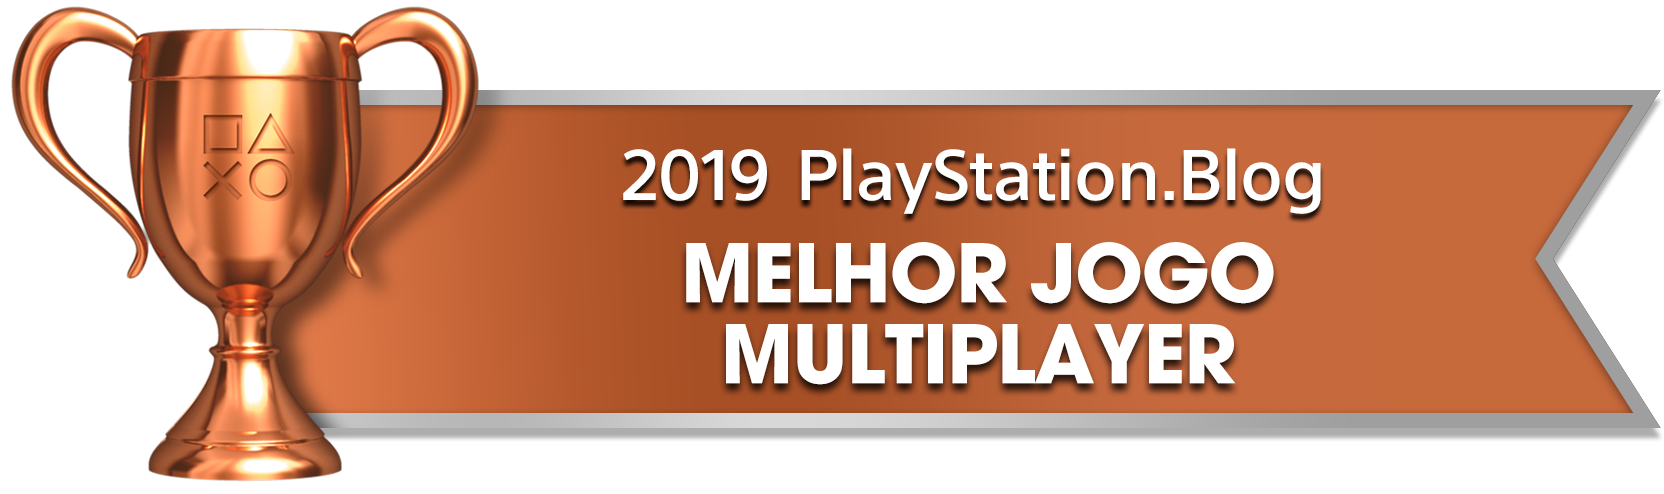 PS Blog Game of the Year 2019 - Best Multiplayer - 4 - Bronze